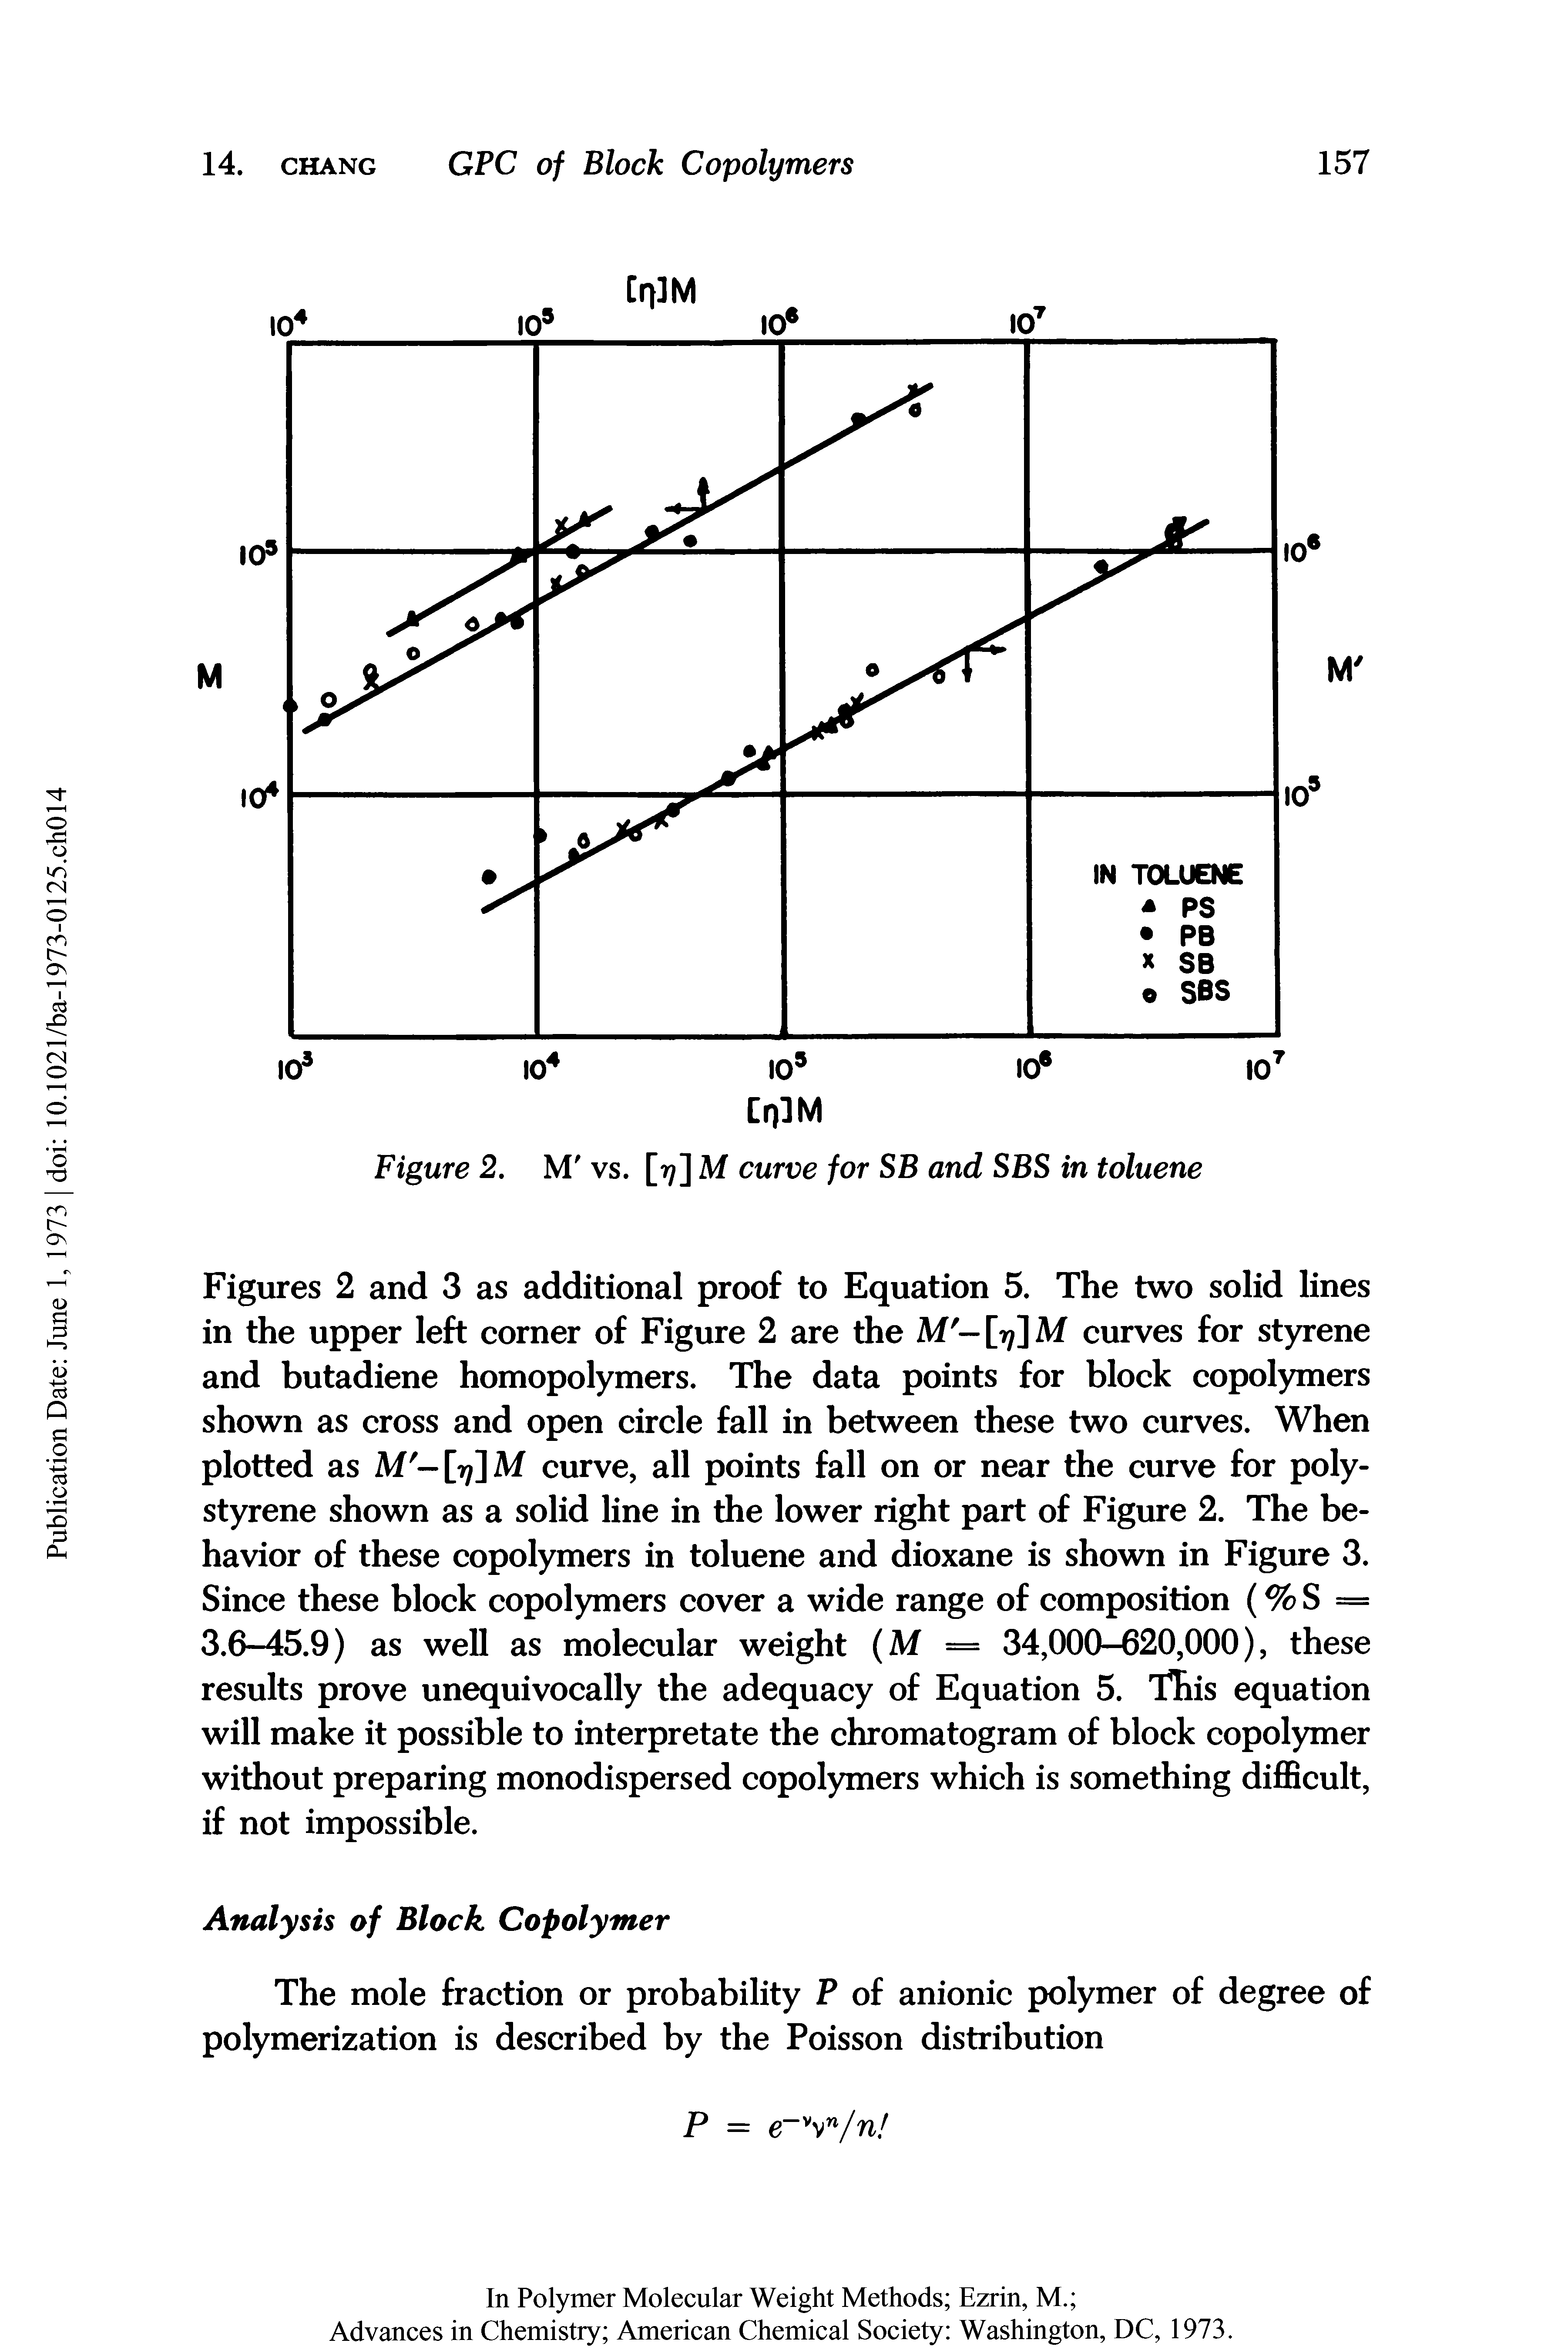 Figures 2 and 3 as additional proof to Equation 5. The two solid lines in the upper left corner of Figure 2 are the M - [77] M curves for styrene and butadiene homopolymers. The data points for block copolymers shown as cross and open circle fall in between these two curves. When plotted as M — [77] M curve, all points fall on or near the curve for polystyrene shown as a solid line in the lower right part of Figure 2. The behavior of these copolymers in toluene and dioxane is shown in Figure 3. Since these block copolymers cover a wide range of composition (% S = 3.6-45.9) as well as molecular weight (M = 34,000-620,000), these results prove unequivocally the adequacy of Equation 5. Tliis equation will make it possible to interpretate the chromatogram of block copolymer without preparing monodispersed copolymers which is something difficult, if not impossible.